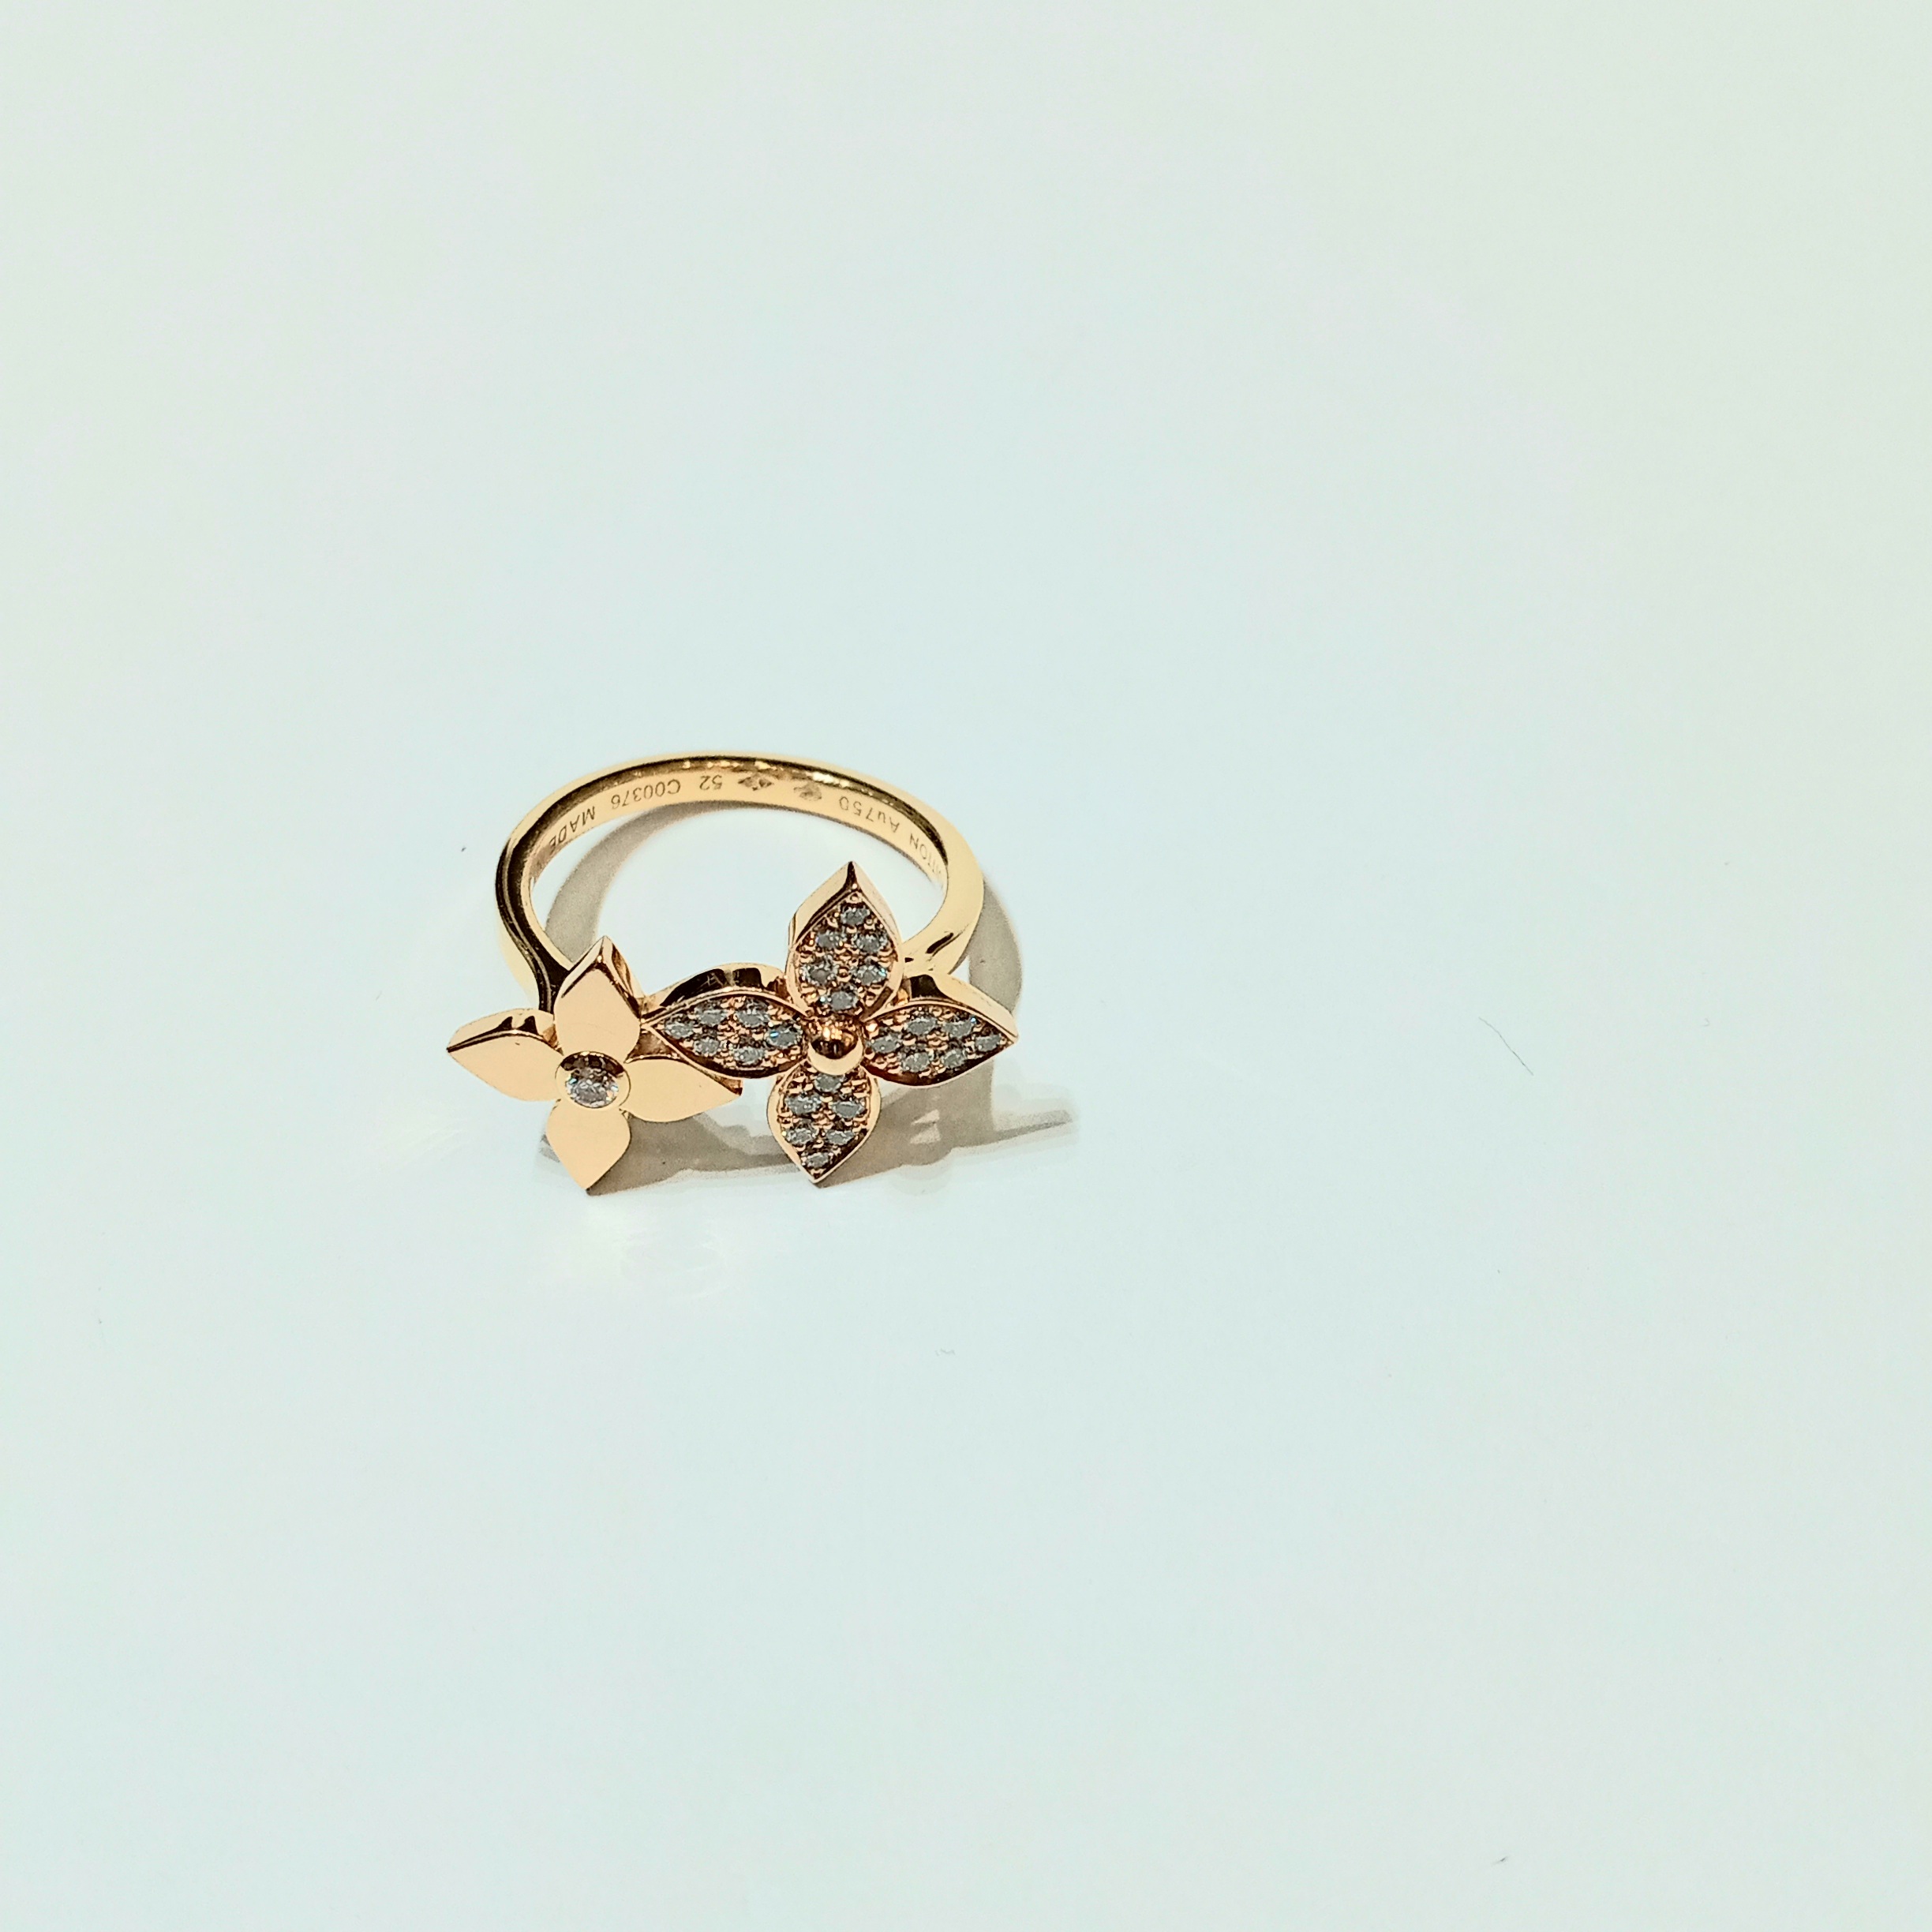 Louis Vuitton Color Blossom Mini Sun Ring, Pink Gold and Diamonds. Size 52